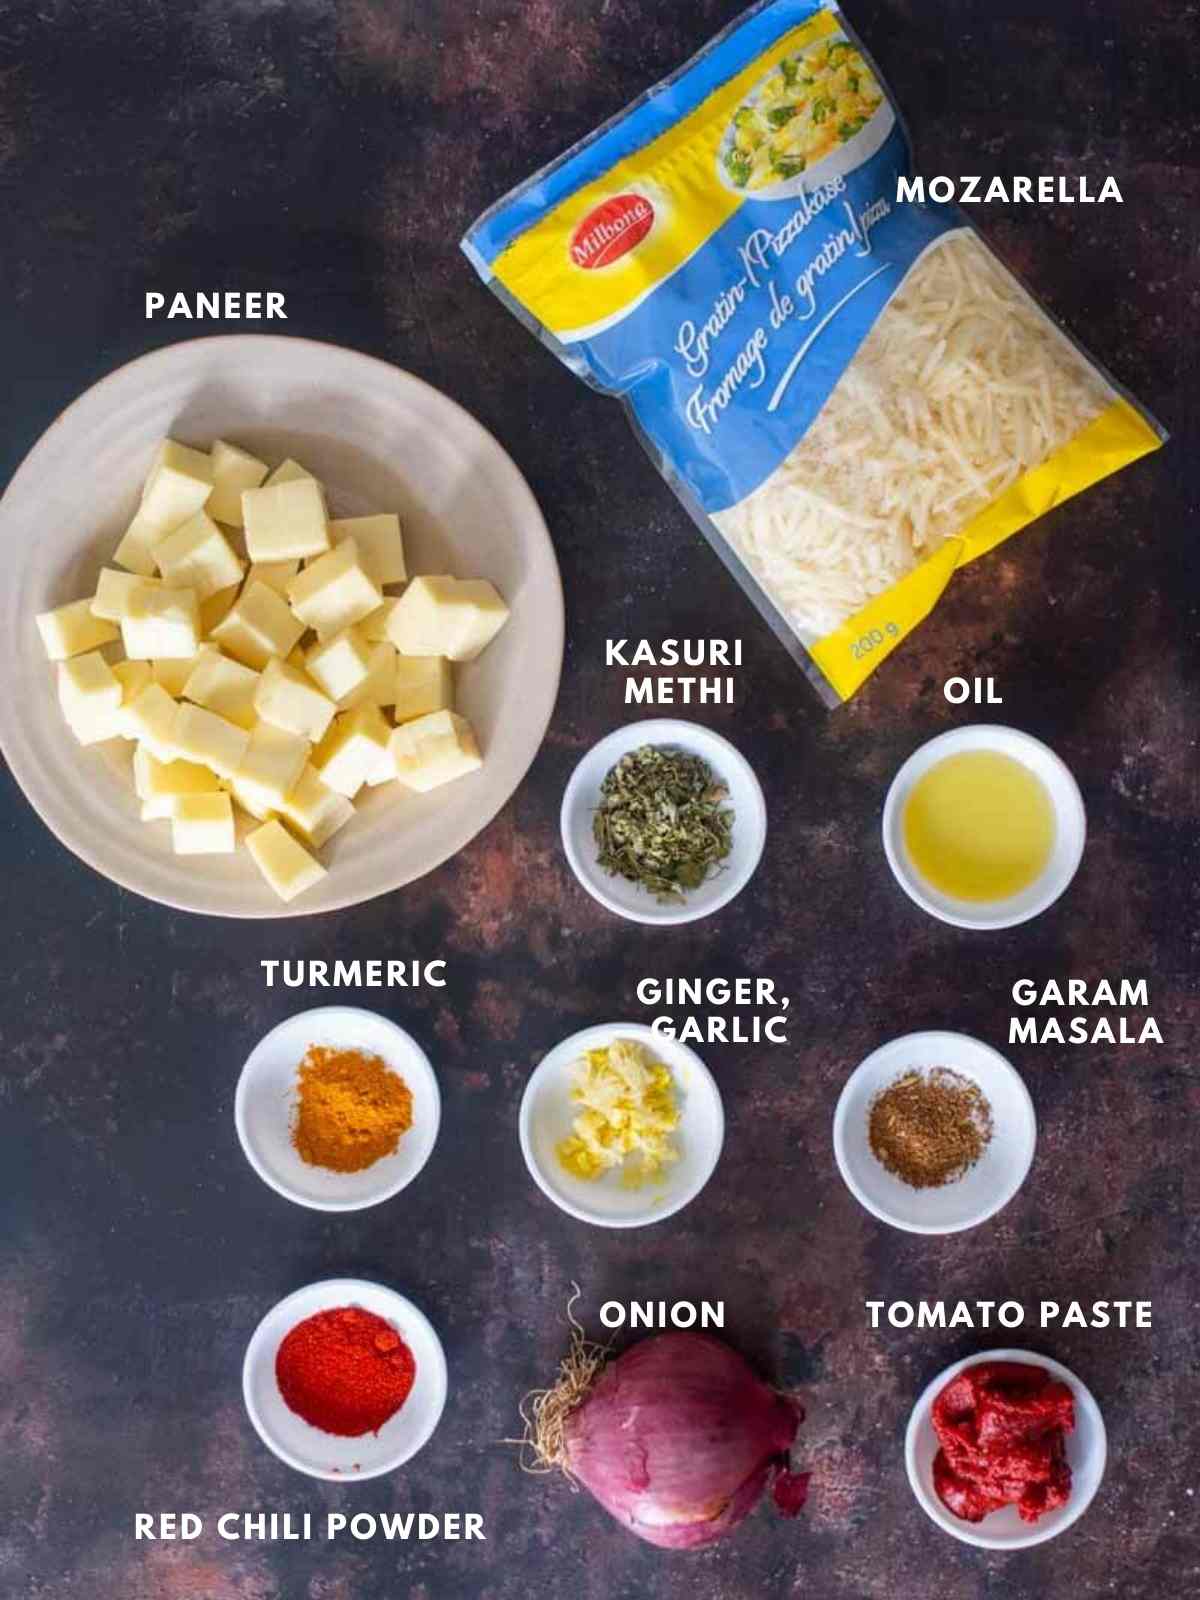 all ingredients for making paneer pizza